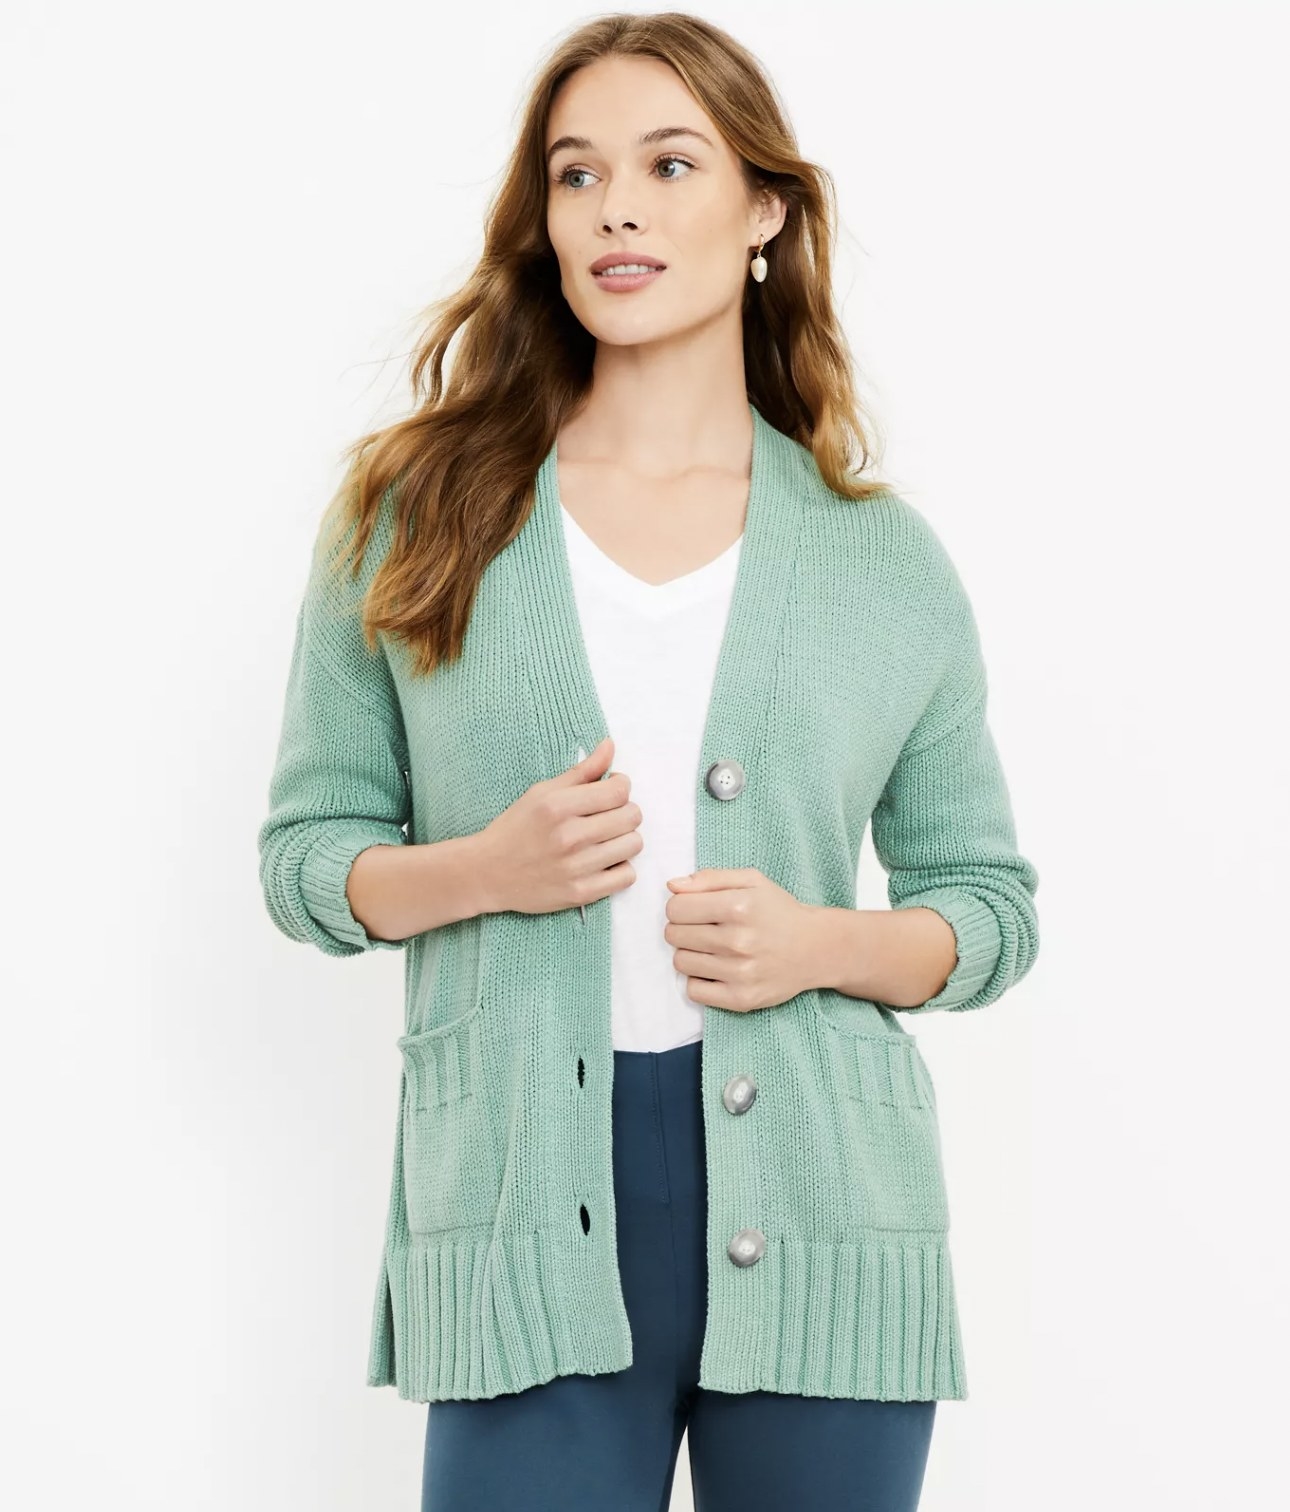 Model wearing the teal cardigan open and layered over white tee